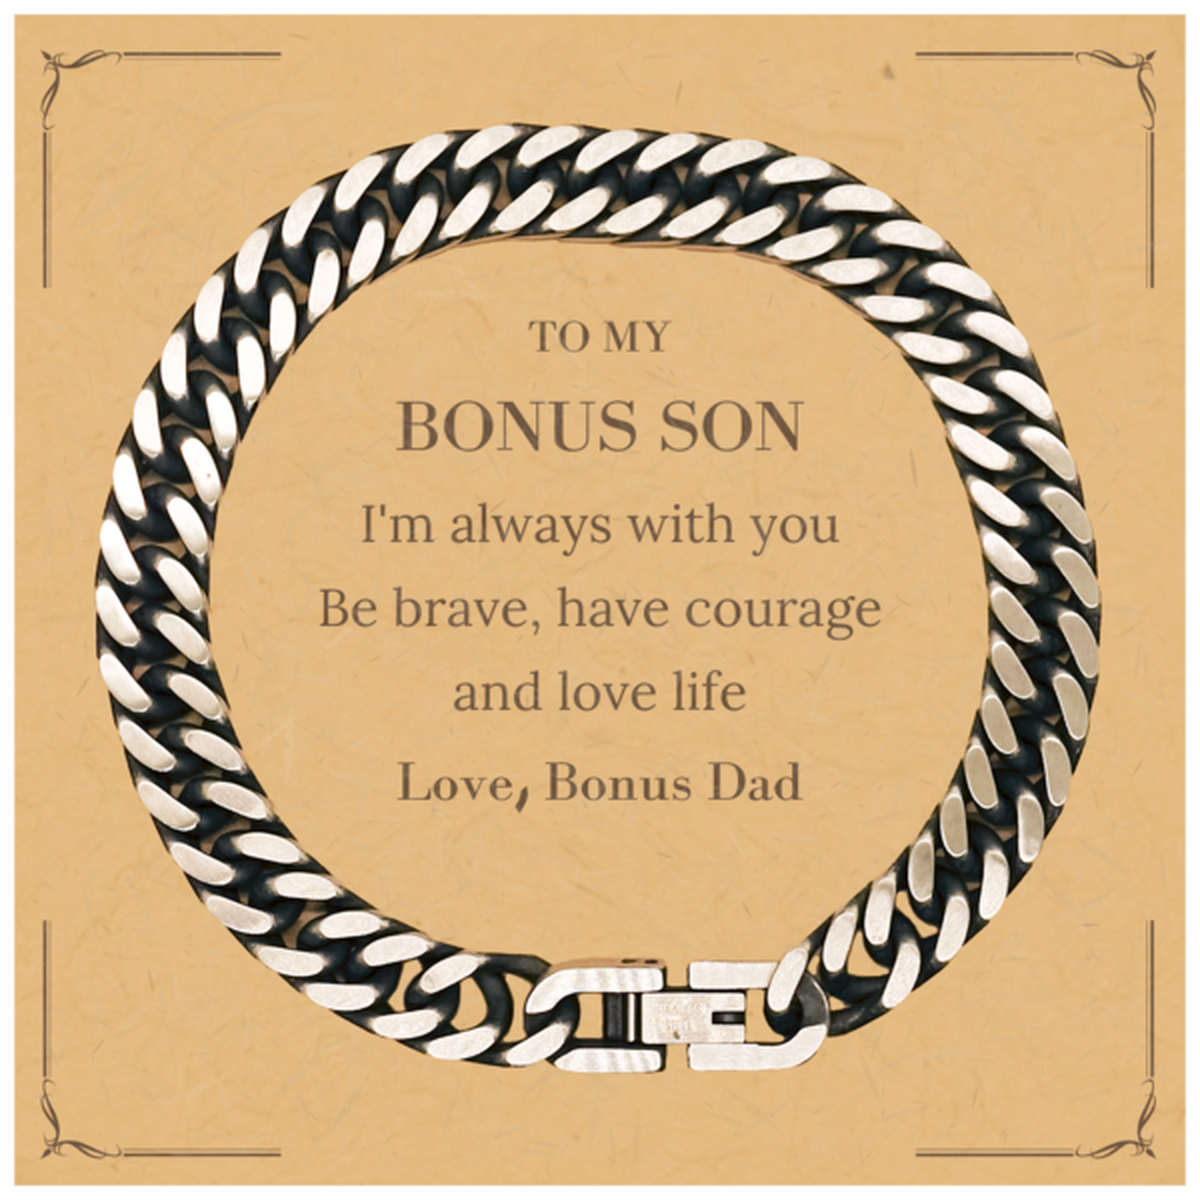 To My Bonus Son Gifts from Bonus Dad, Unique Cuban Link Chain Bracelet Inspirational Christmas Birthday Graduation Gifts for Bonus Son I'm always with you. Be brave, have courage and love life. Love, Bonus Dad